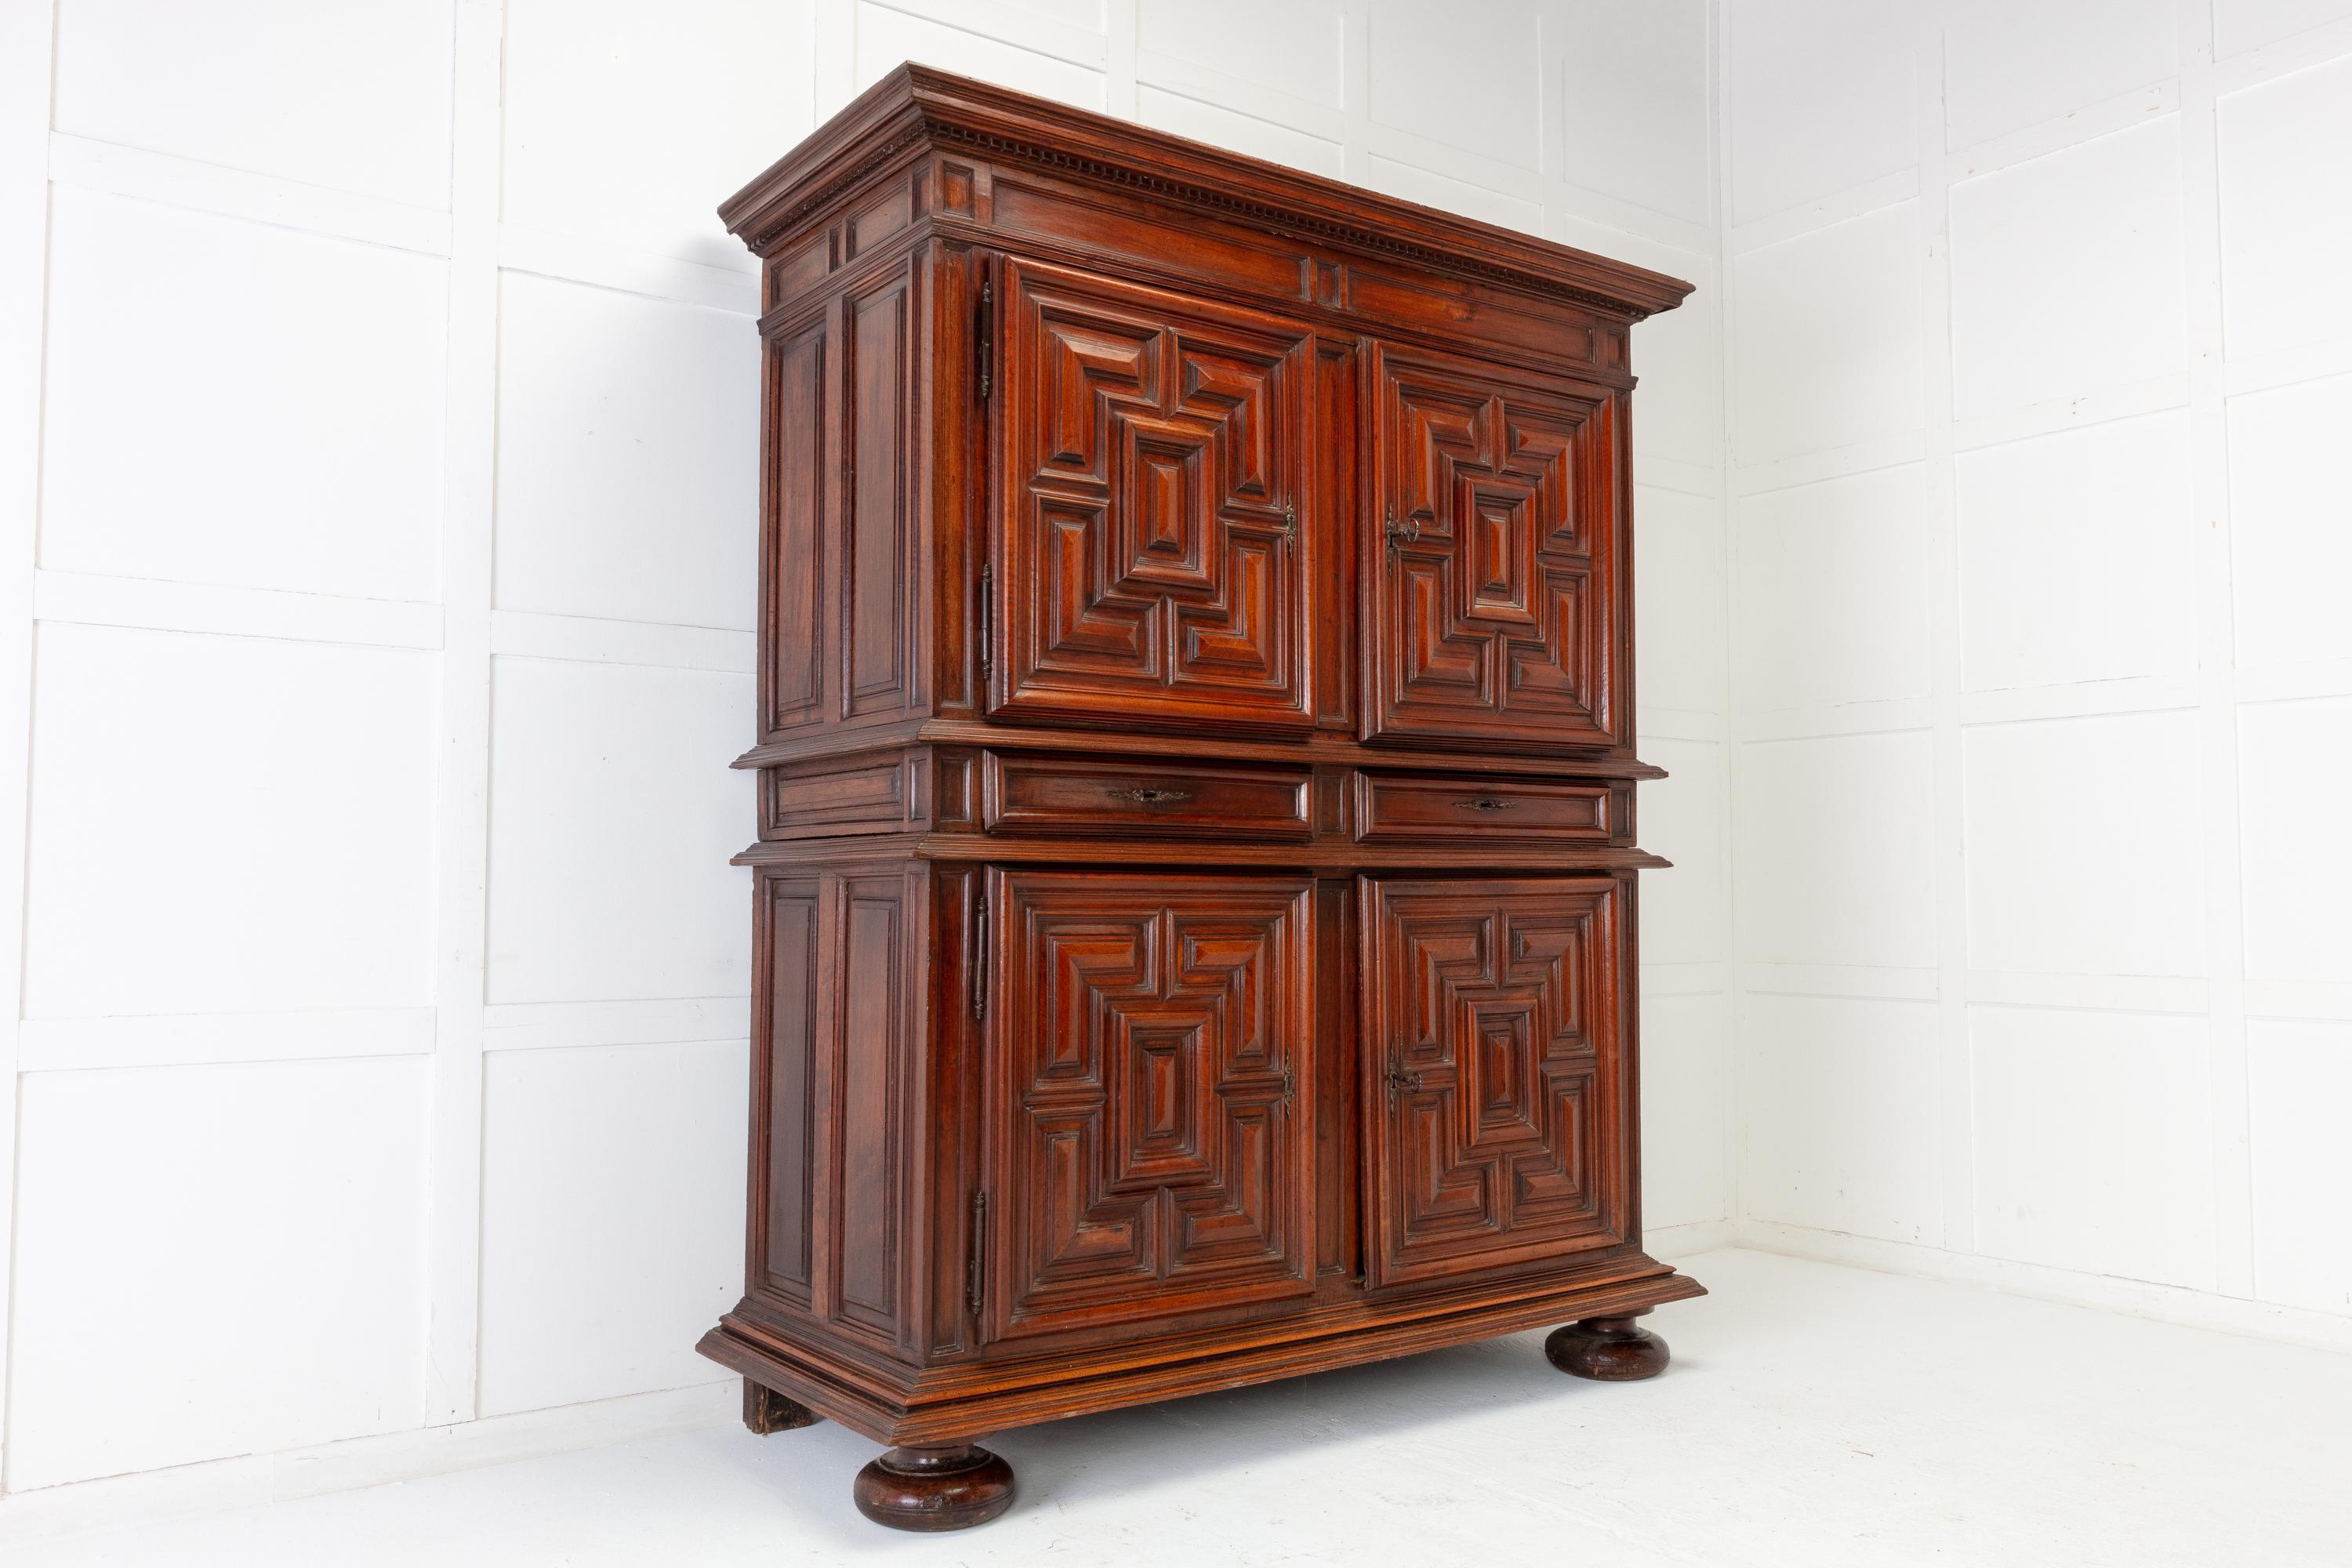 18th century Dutch walnut cabinet of substantial quality, having a shaped cornice with dentil carving. Four geometrically moulded panel doors giving it a nice balanced design, that open to reveal a large storage space. The sides are also heavily